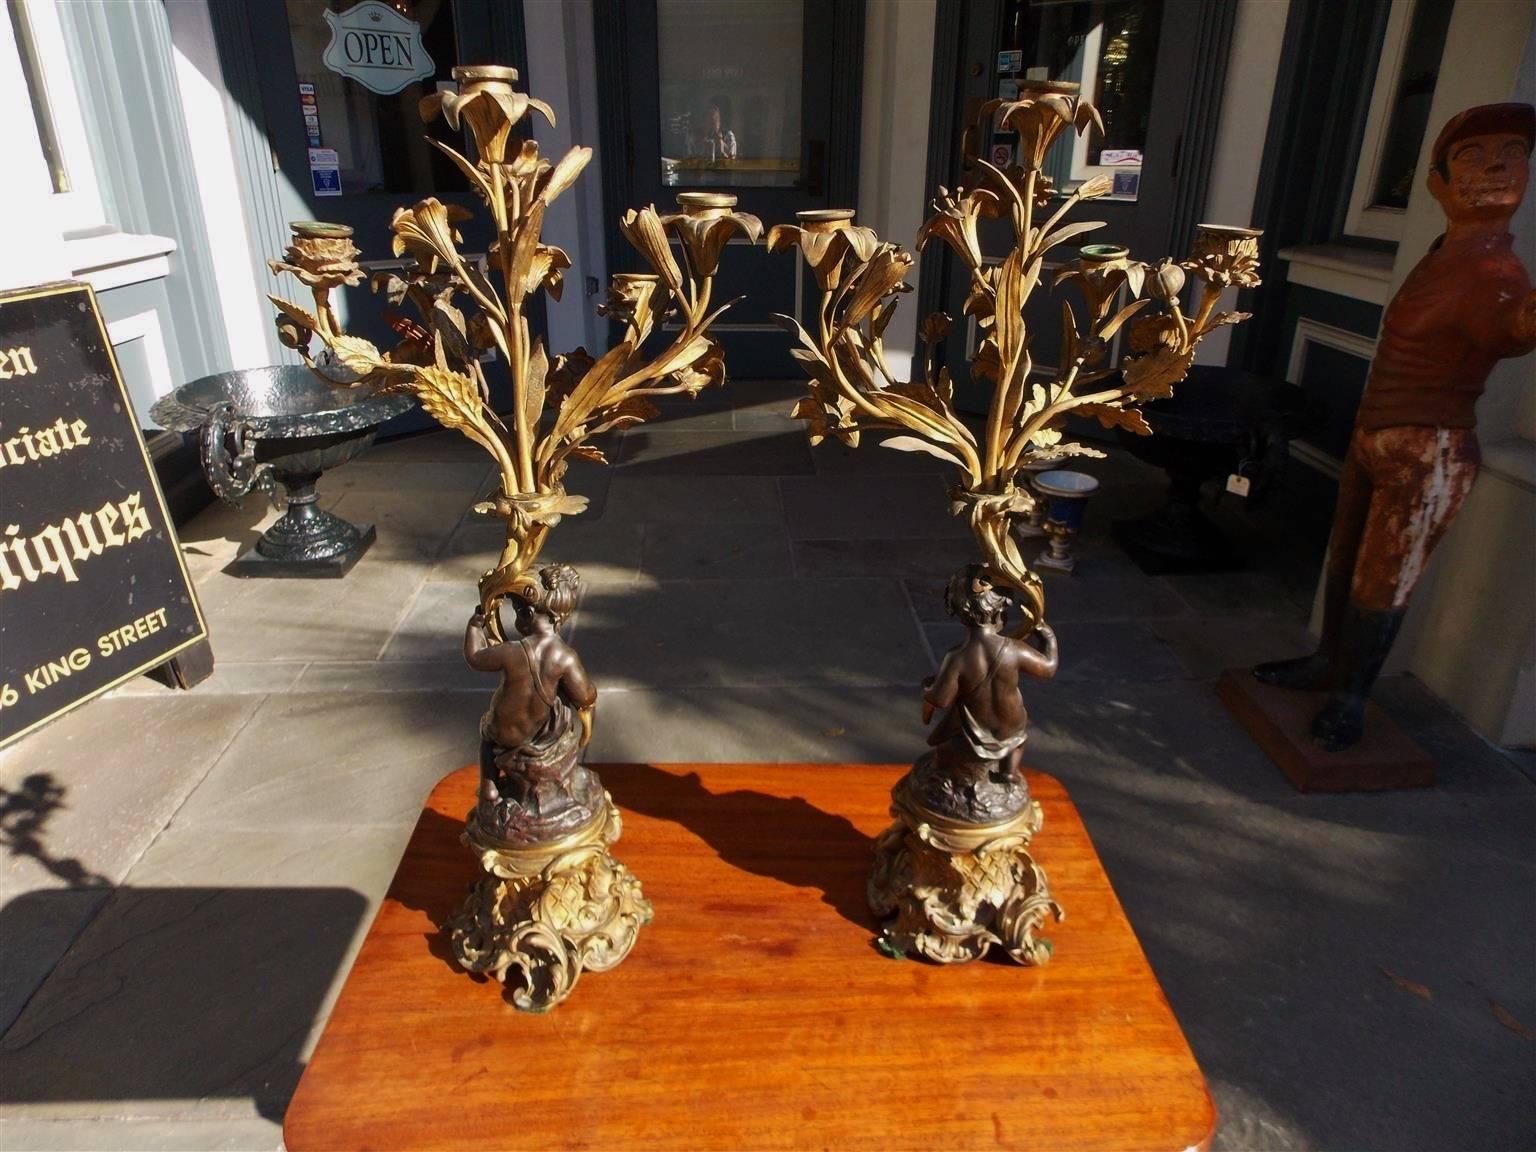 Pair of French ormolu and bronze five-arm candelabras with flanking cherubs, candle bobeches, and resting on circular plinths with basket weave, floral & shell motif, Early 19th century. Candle powered and can be electrified if desired, Early 19th